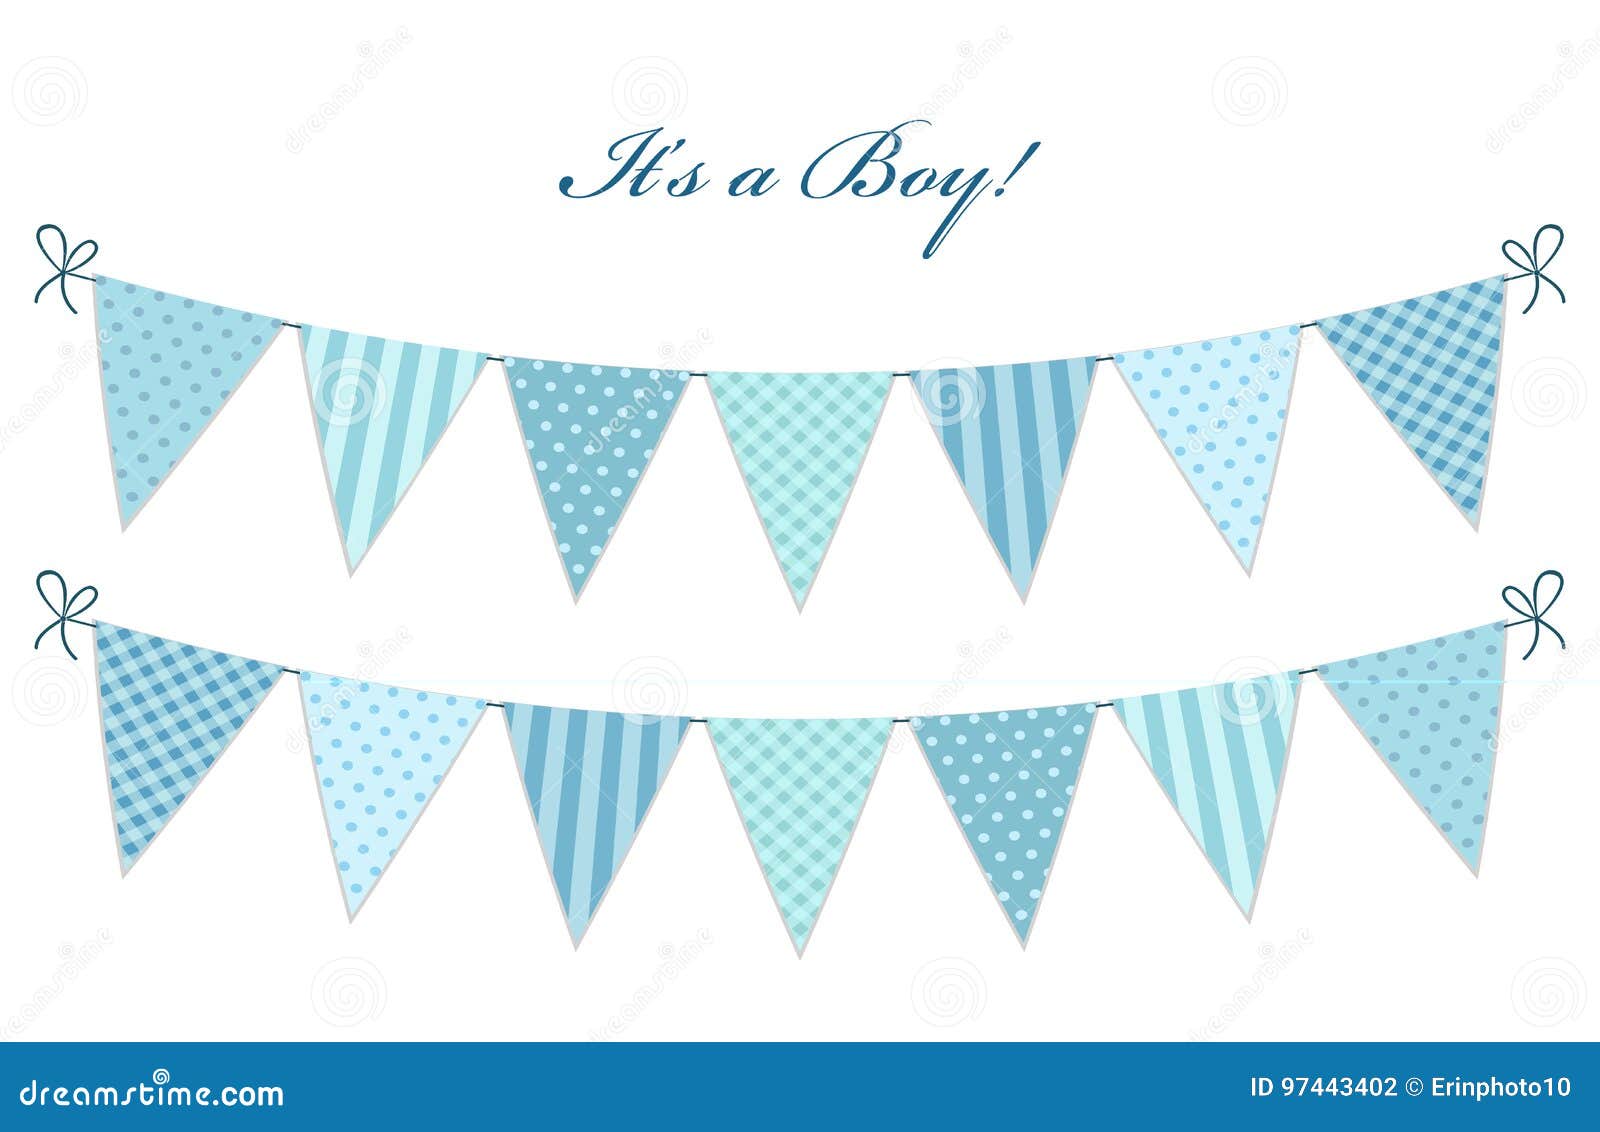 Bunting Light Blue Stripes Baby Shower Its a Boy Bunting 10m Flags Birthday 